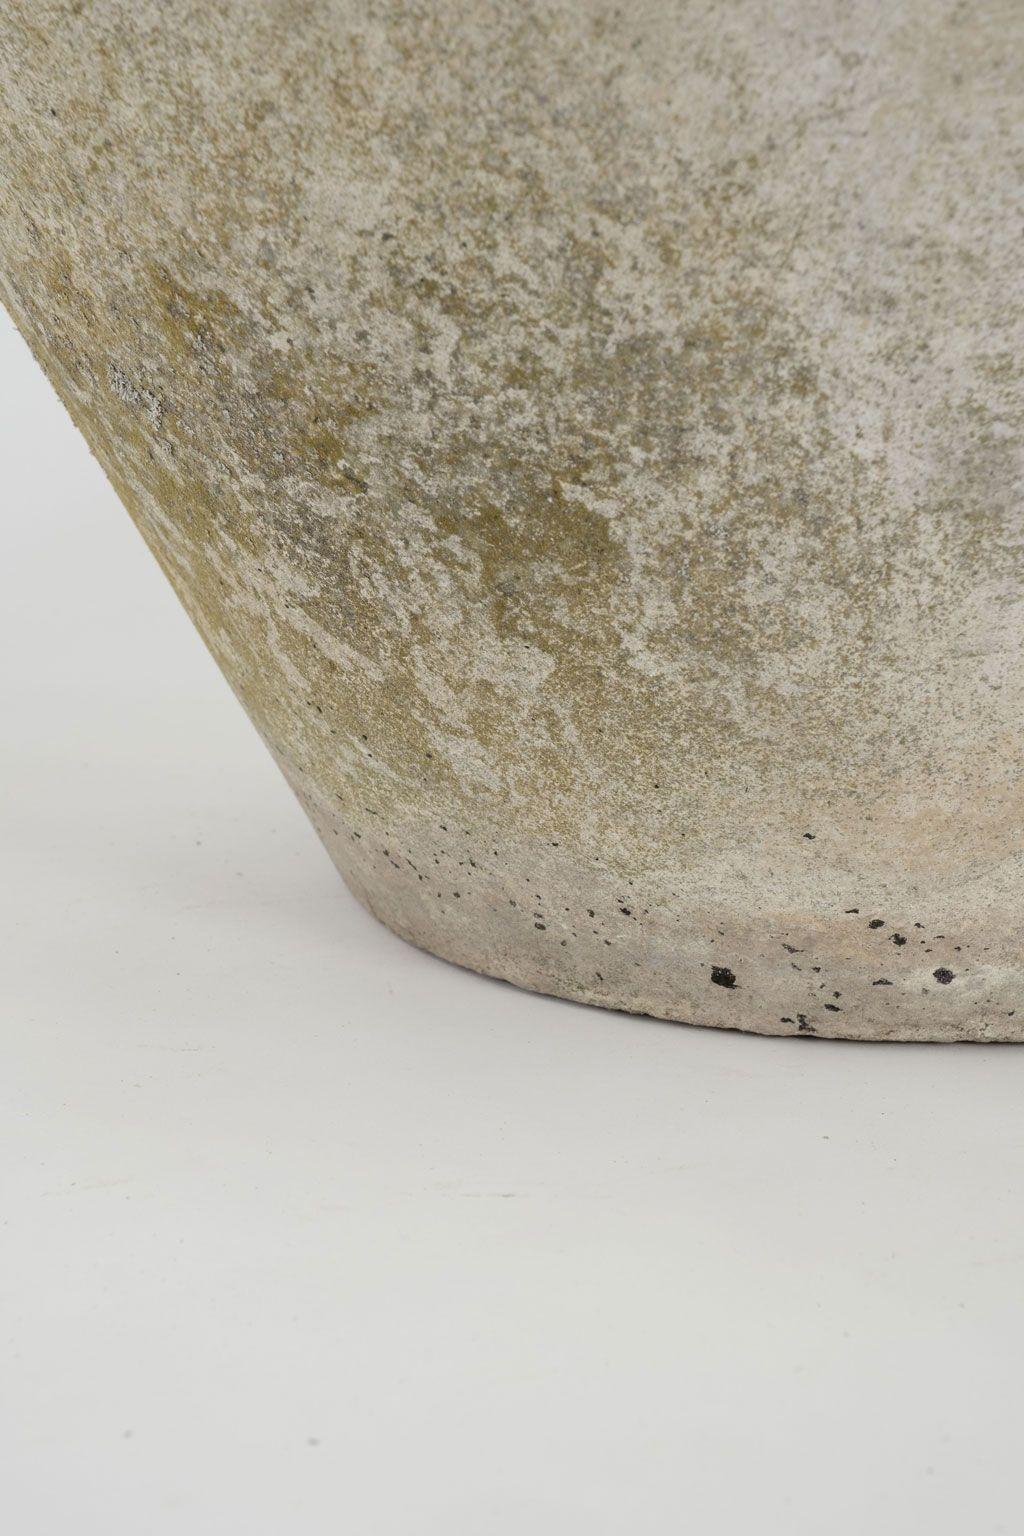 Mid-Century Modern Large Tapered Round Concrete Willy Guhl Planter For Sale